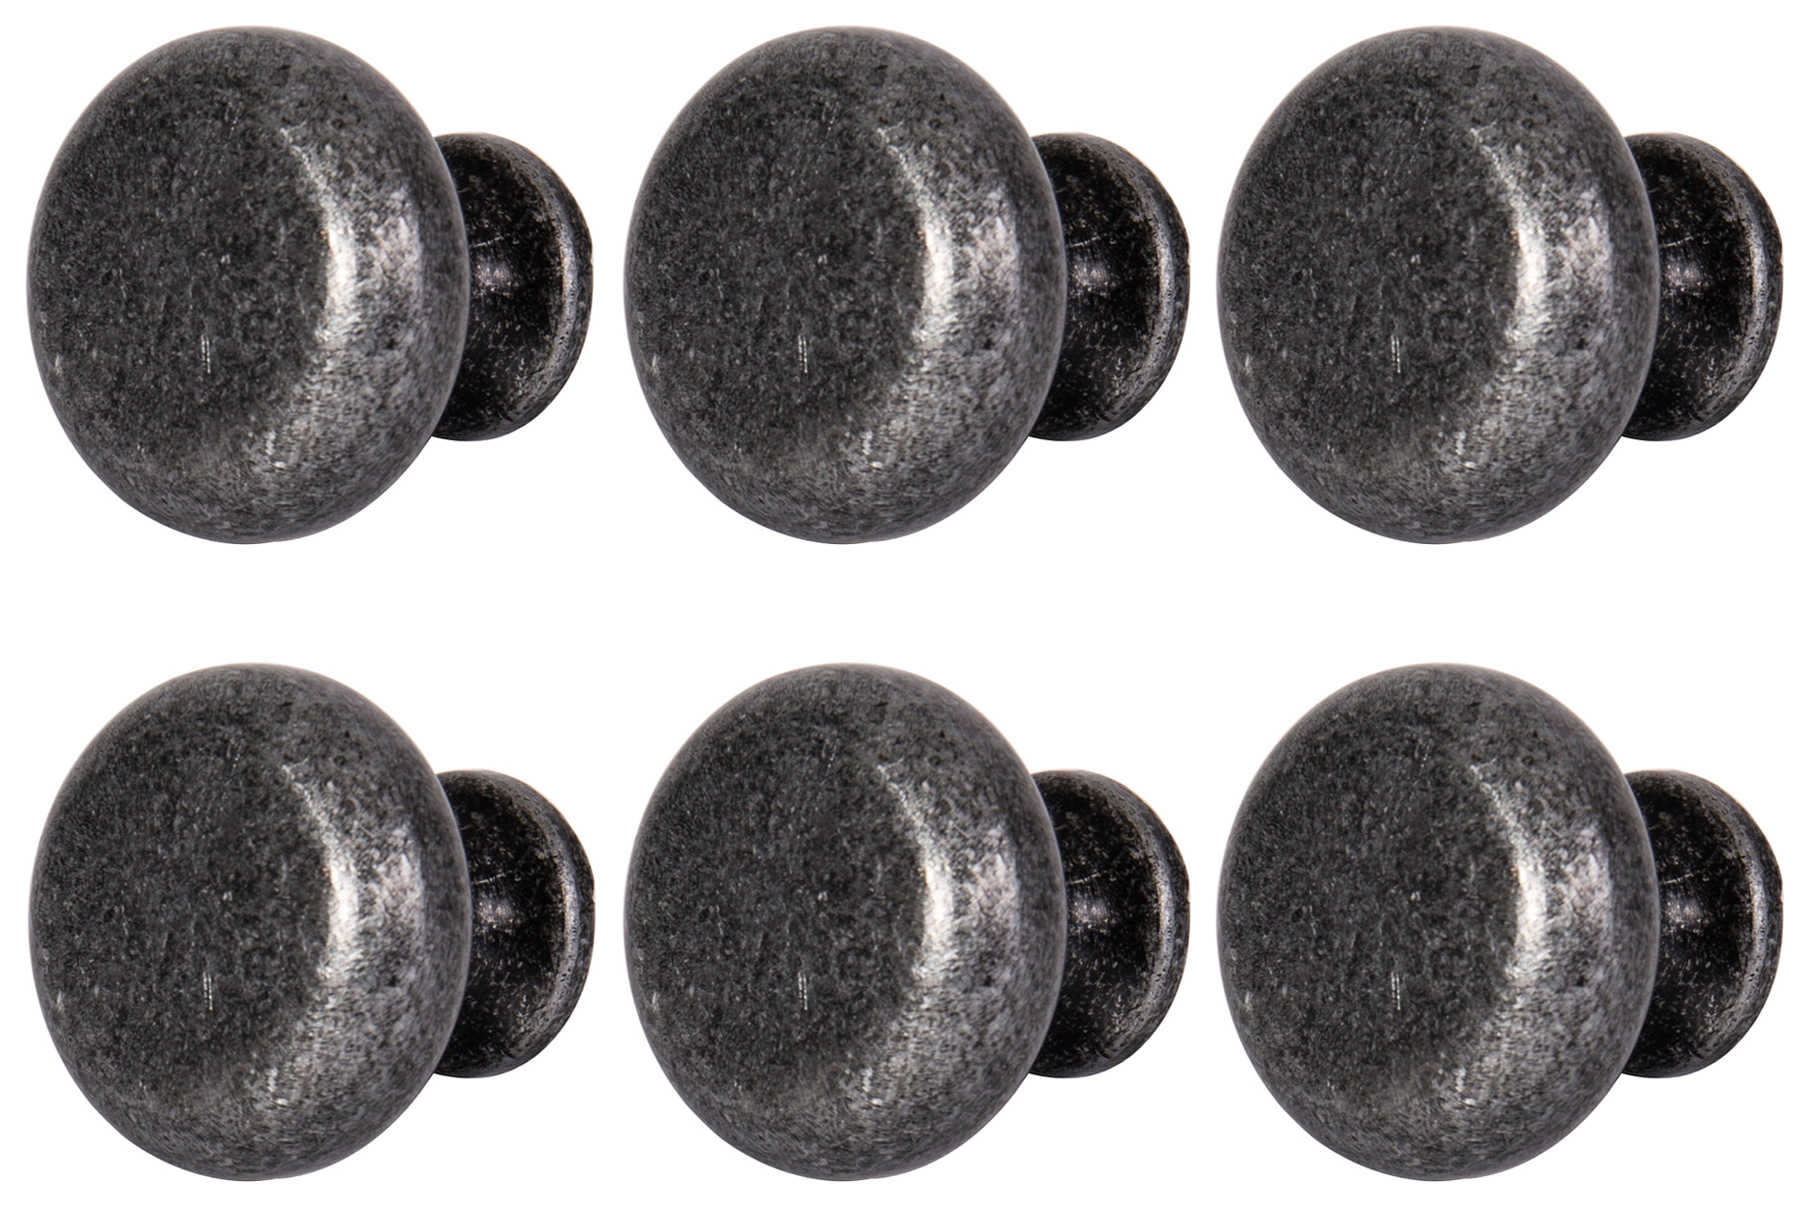 Circle Cabinet Knob Antique Steel 30mm - Pack of 6